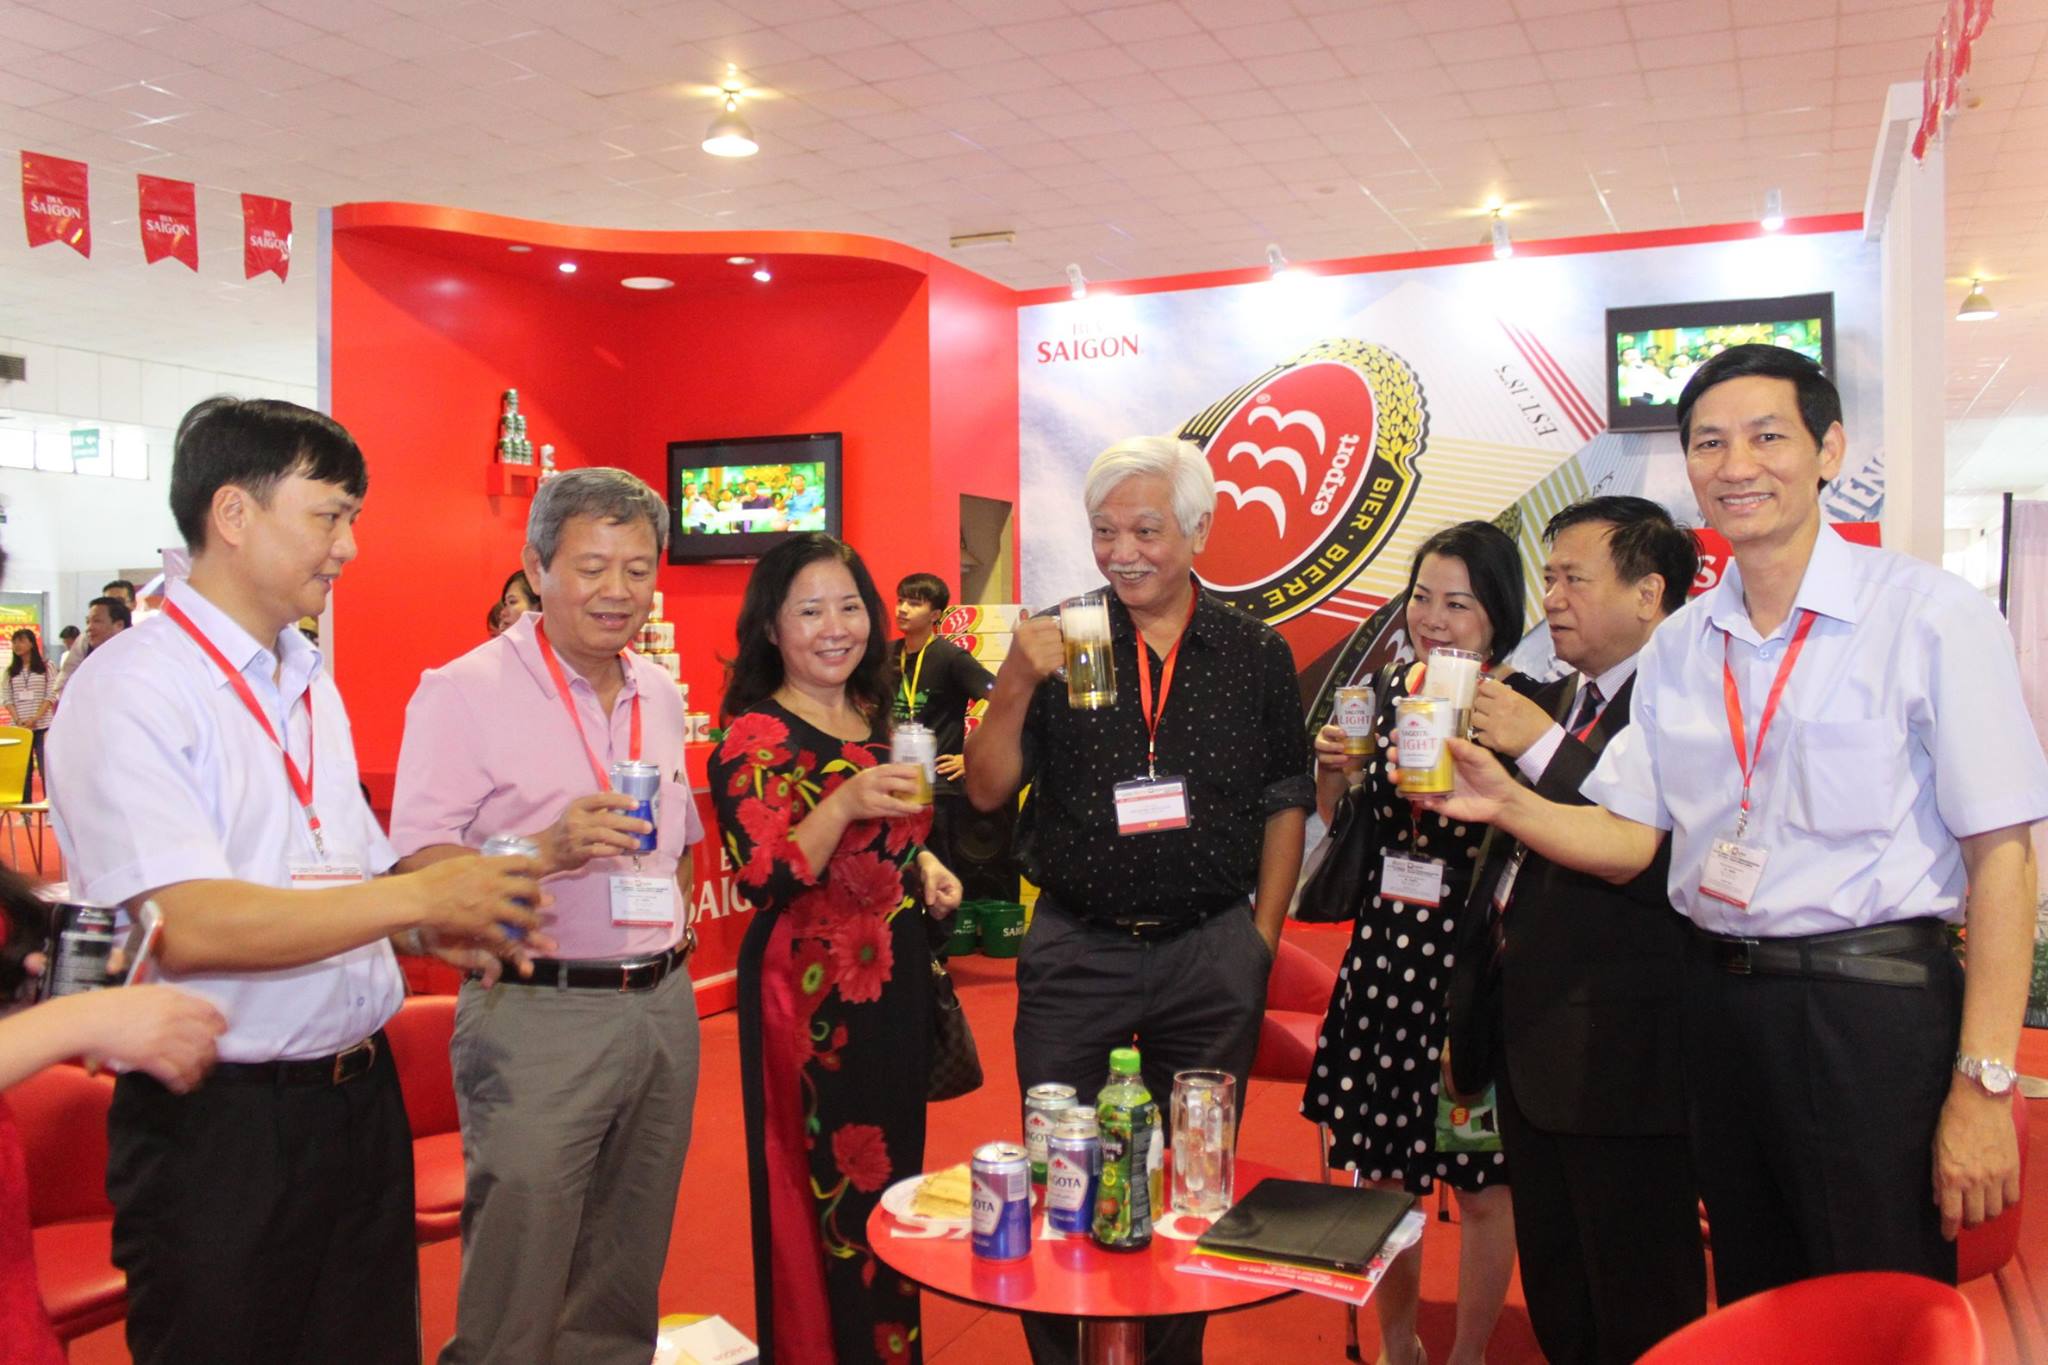 The 10th International Exhibition on Food & Beverage in Hanoi